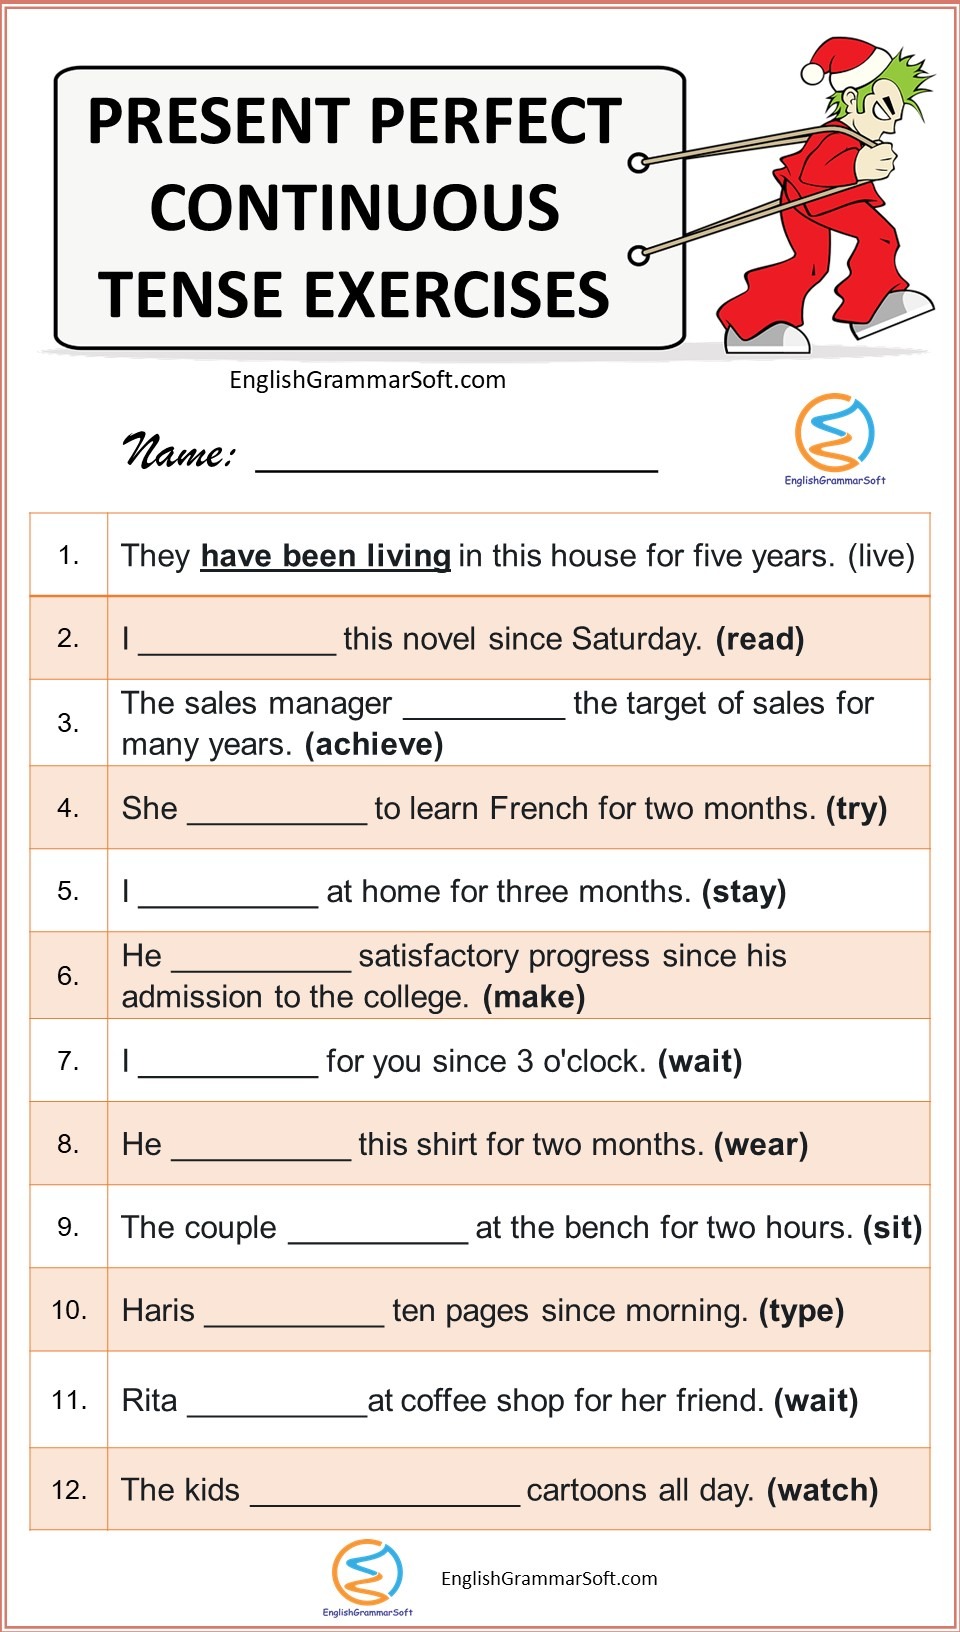 Present Perfect Continuous Tense Rules Structure And Examples EnglishGrammarSoft